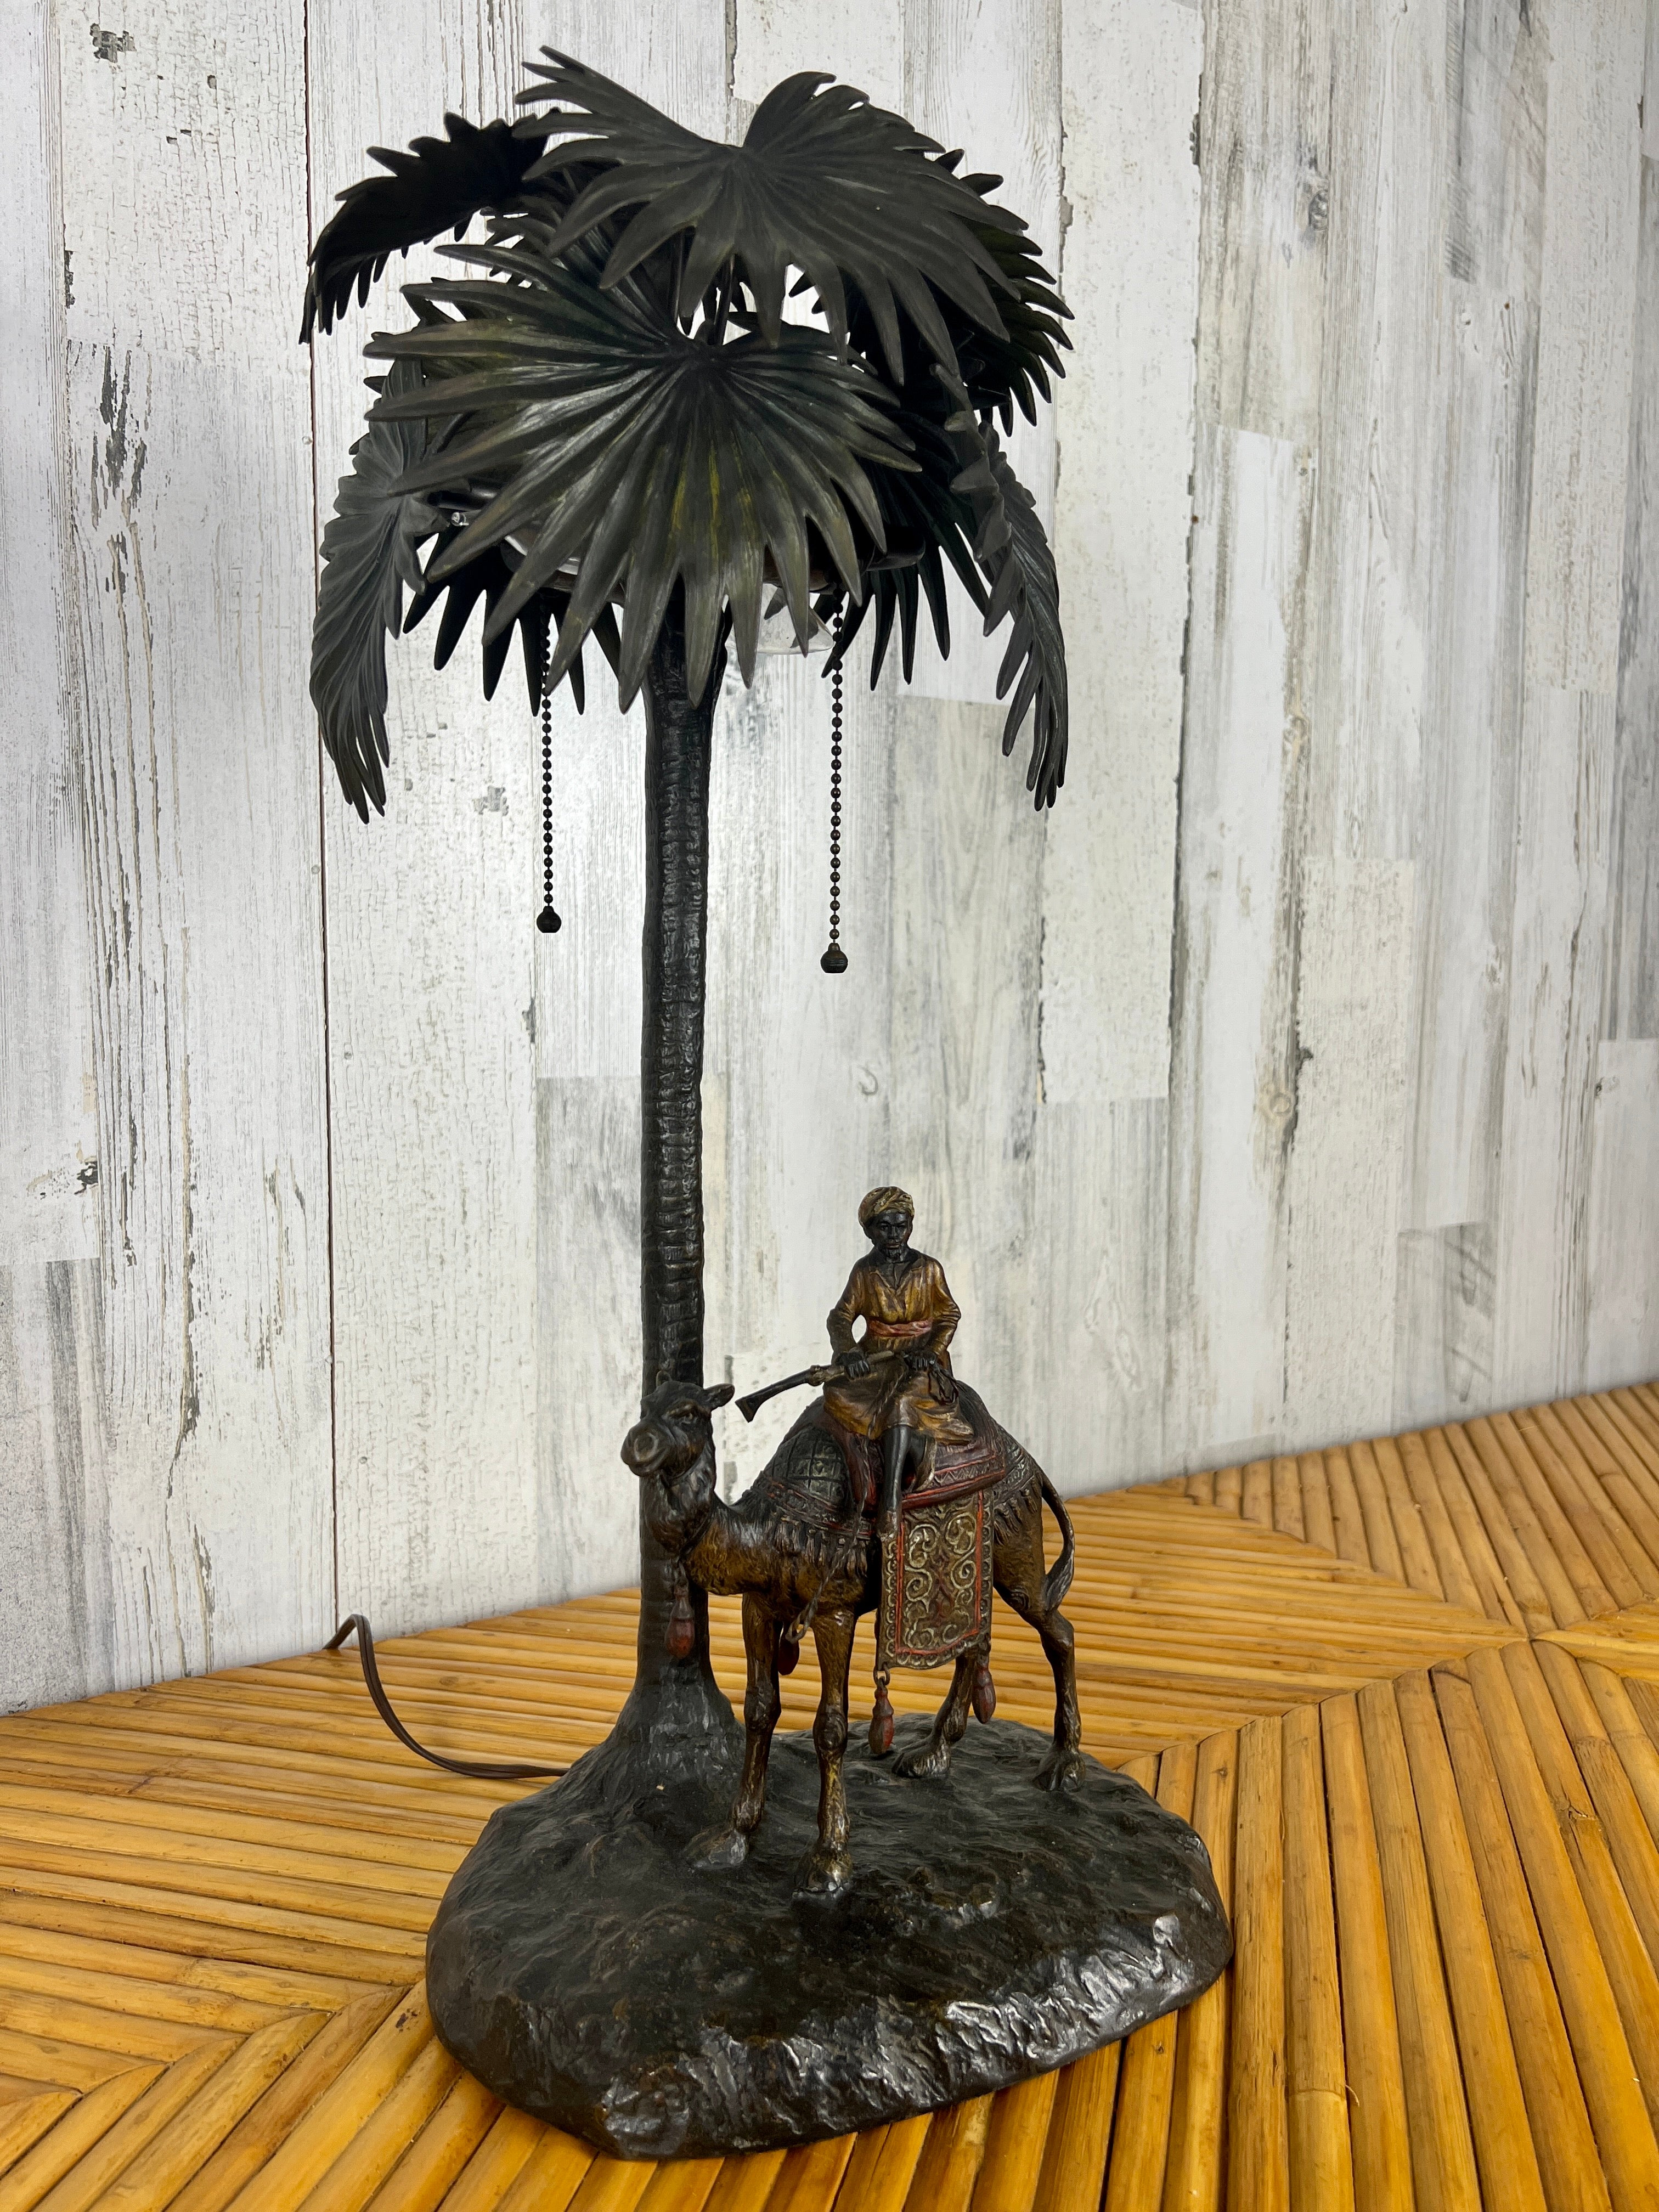 Viennese cold painted bronze orientalist lamp attributed to Bergman of a middle eastern man riding a camel. 
Signed Austria.